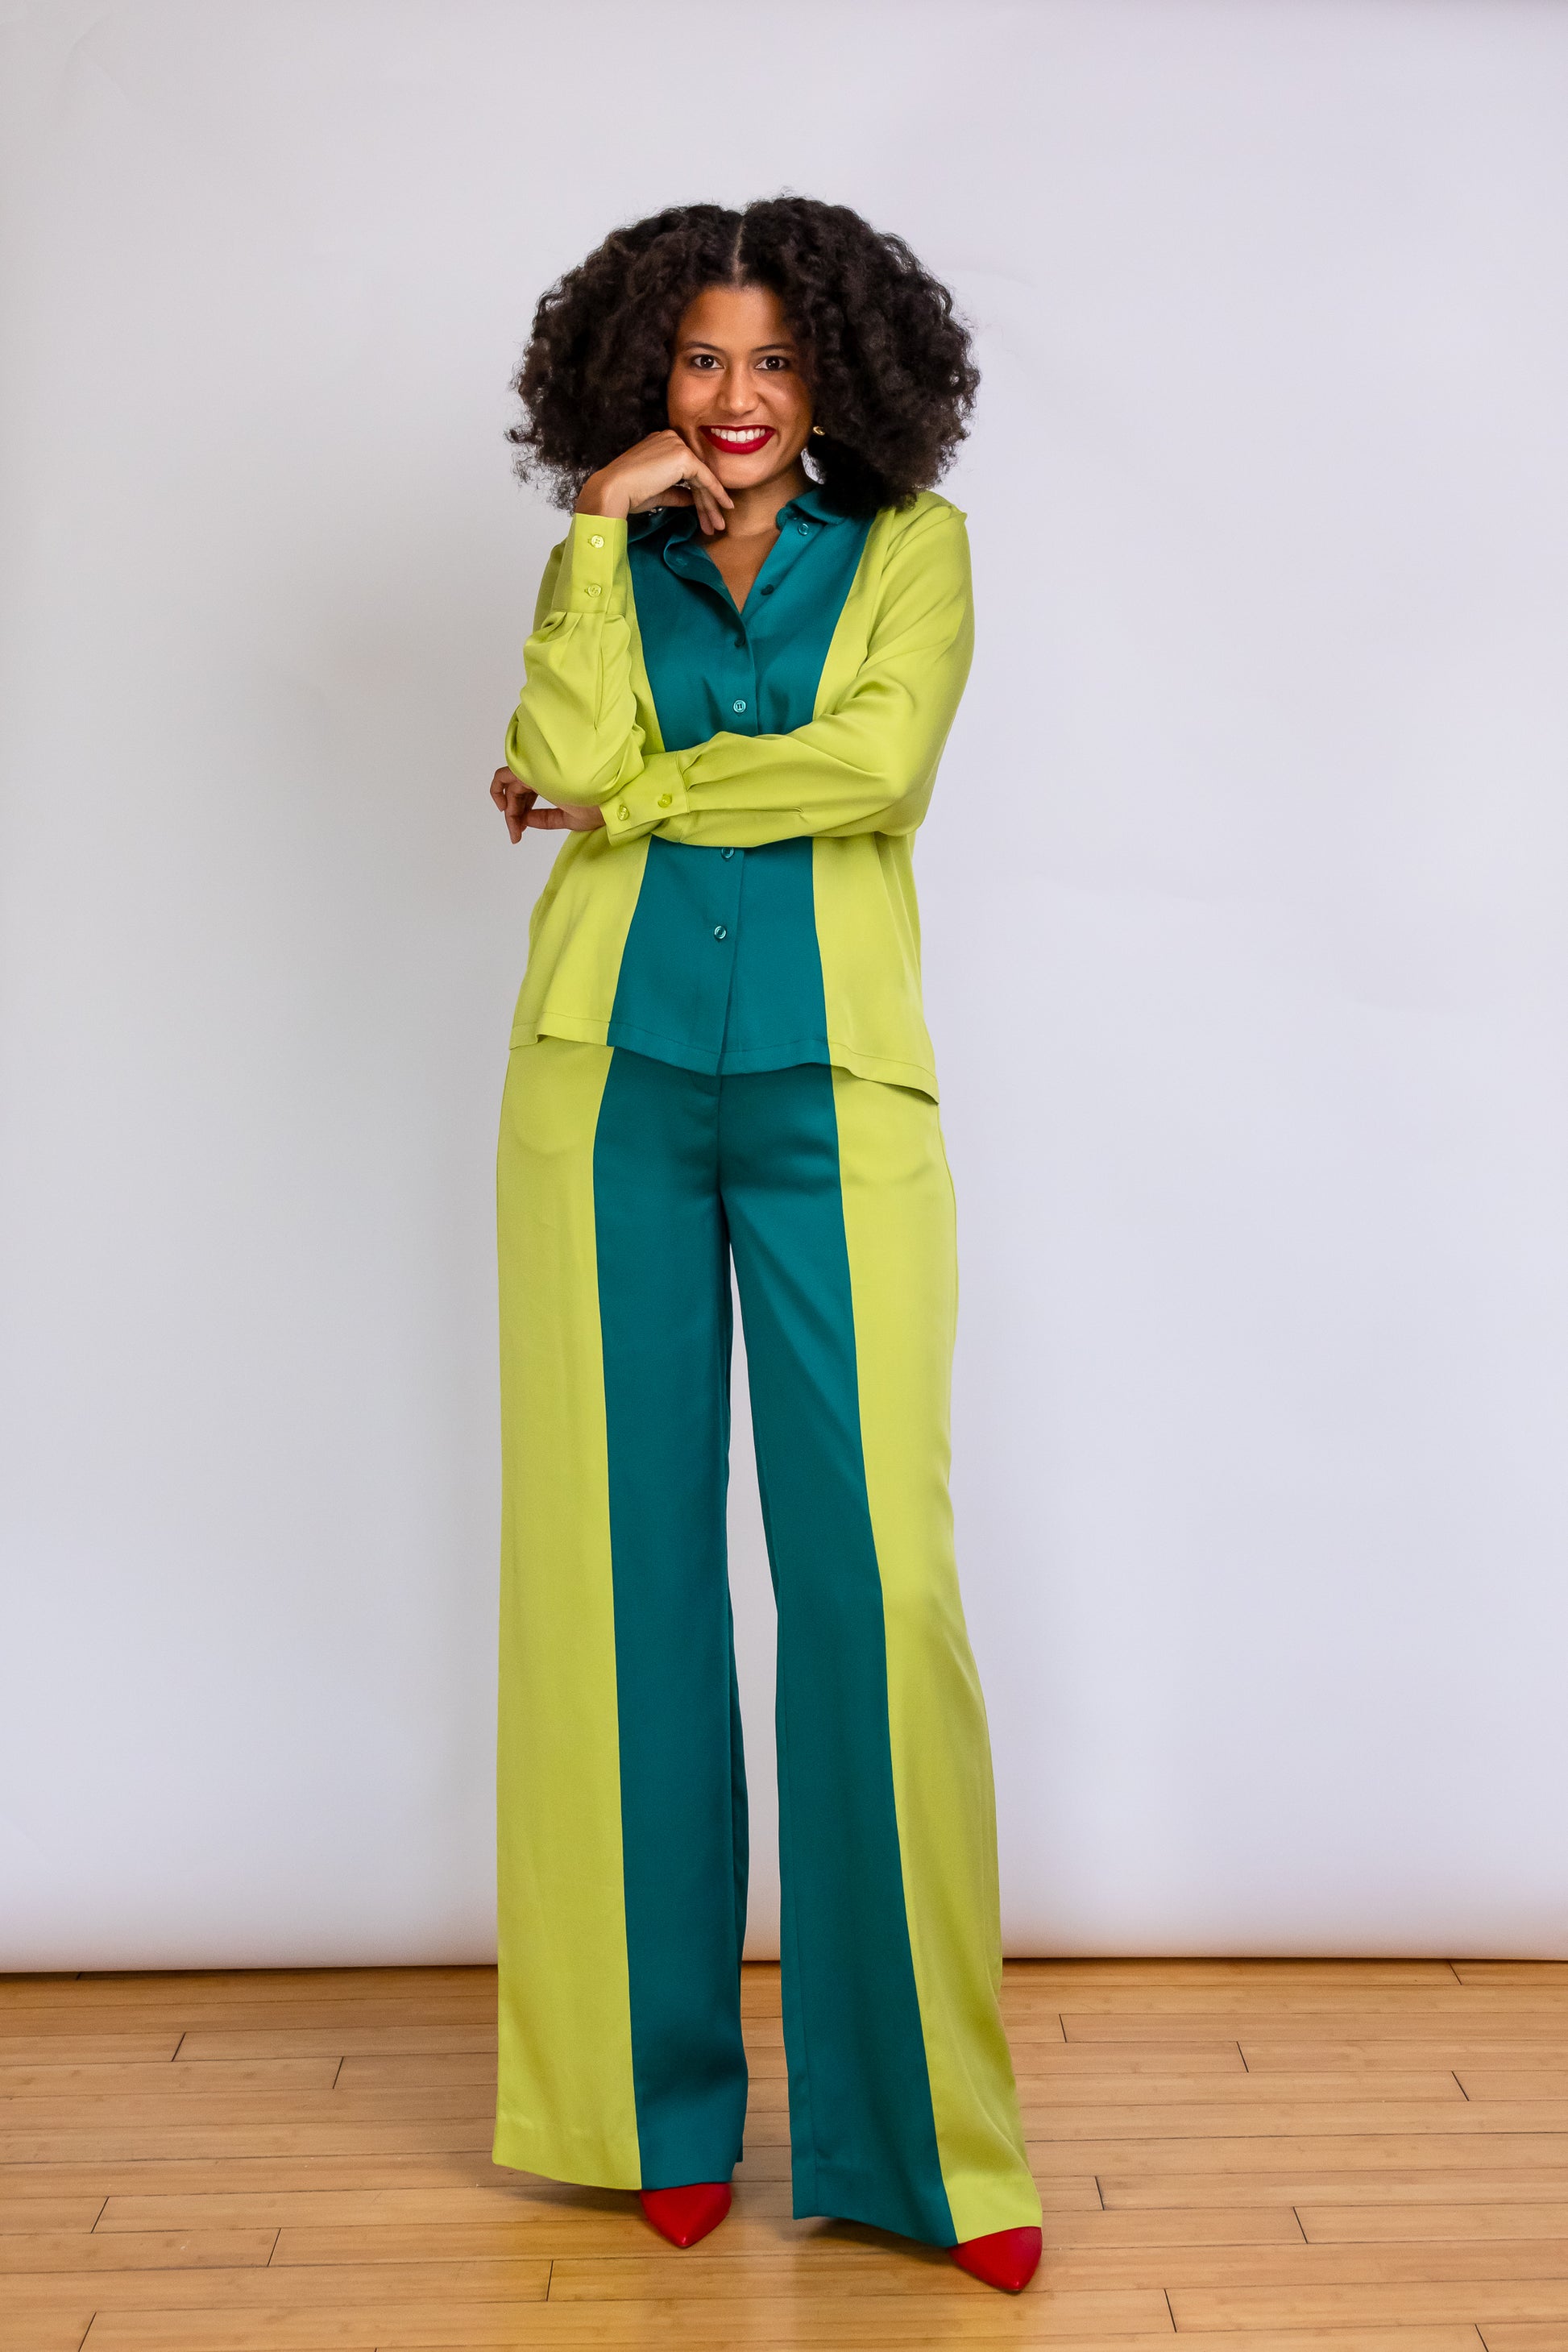 London Two-Tone Wide Leg Pants are made for tall women with a 38" inseam.